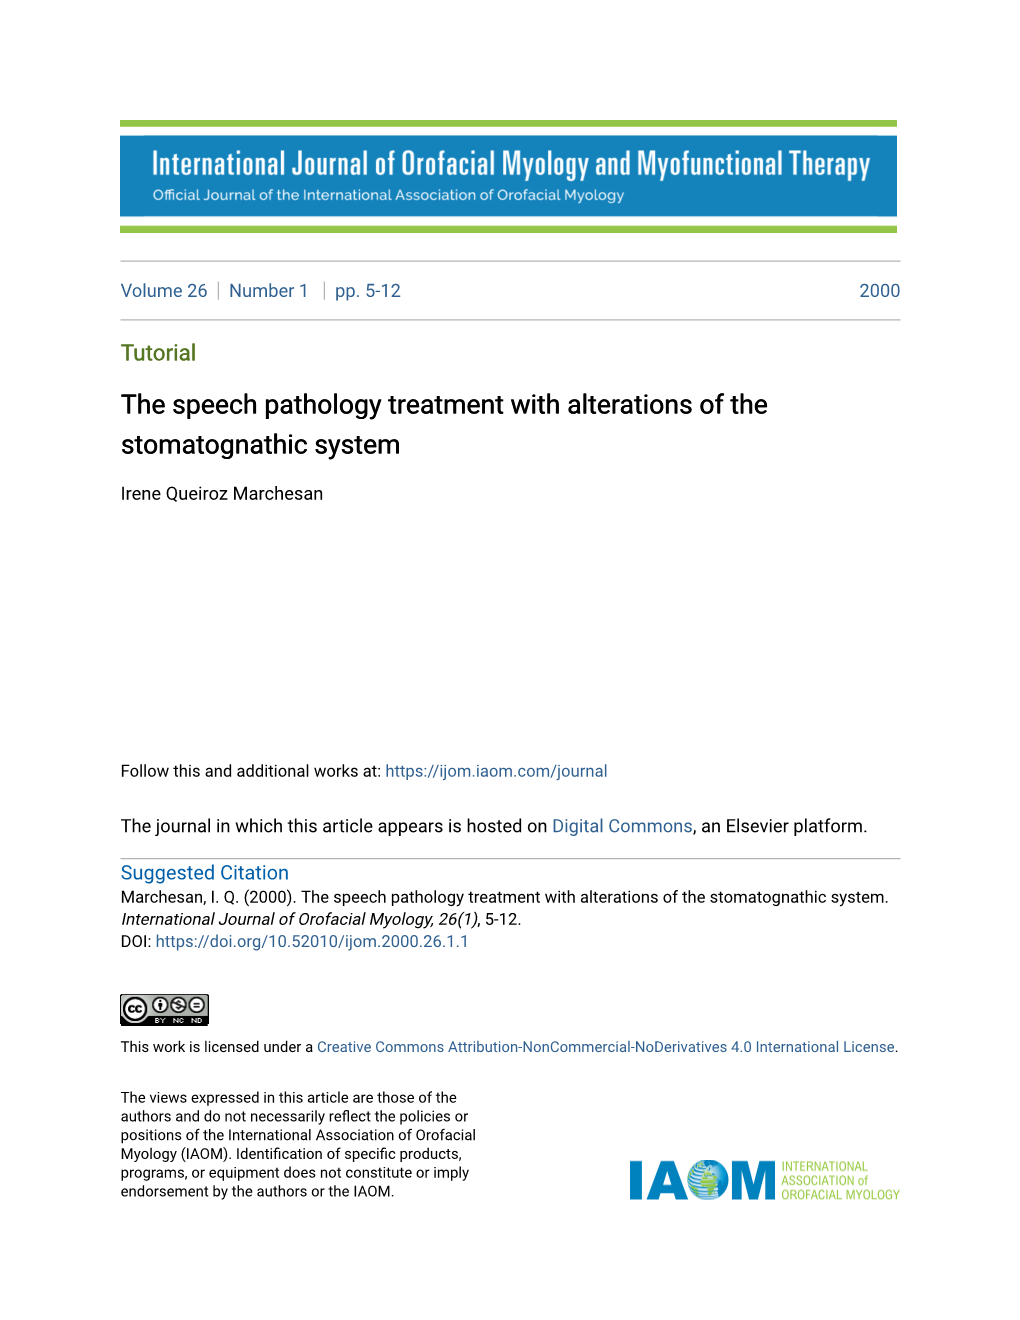 The Speech Pathology Treatment with Alterations of the Stomatognathic System